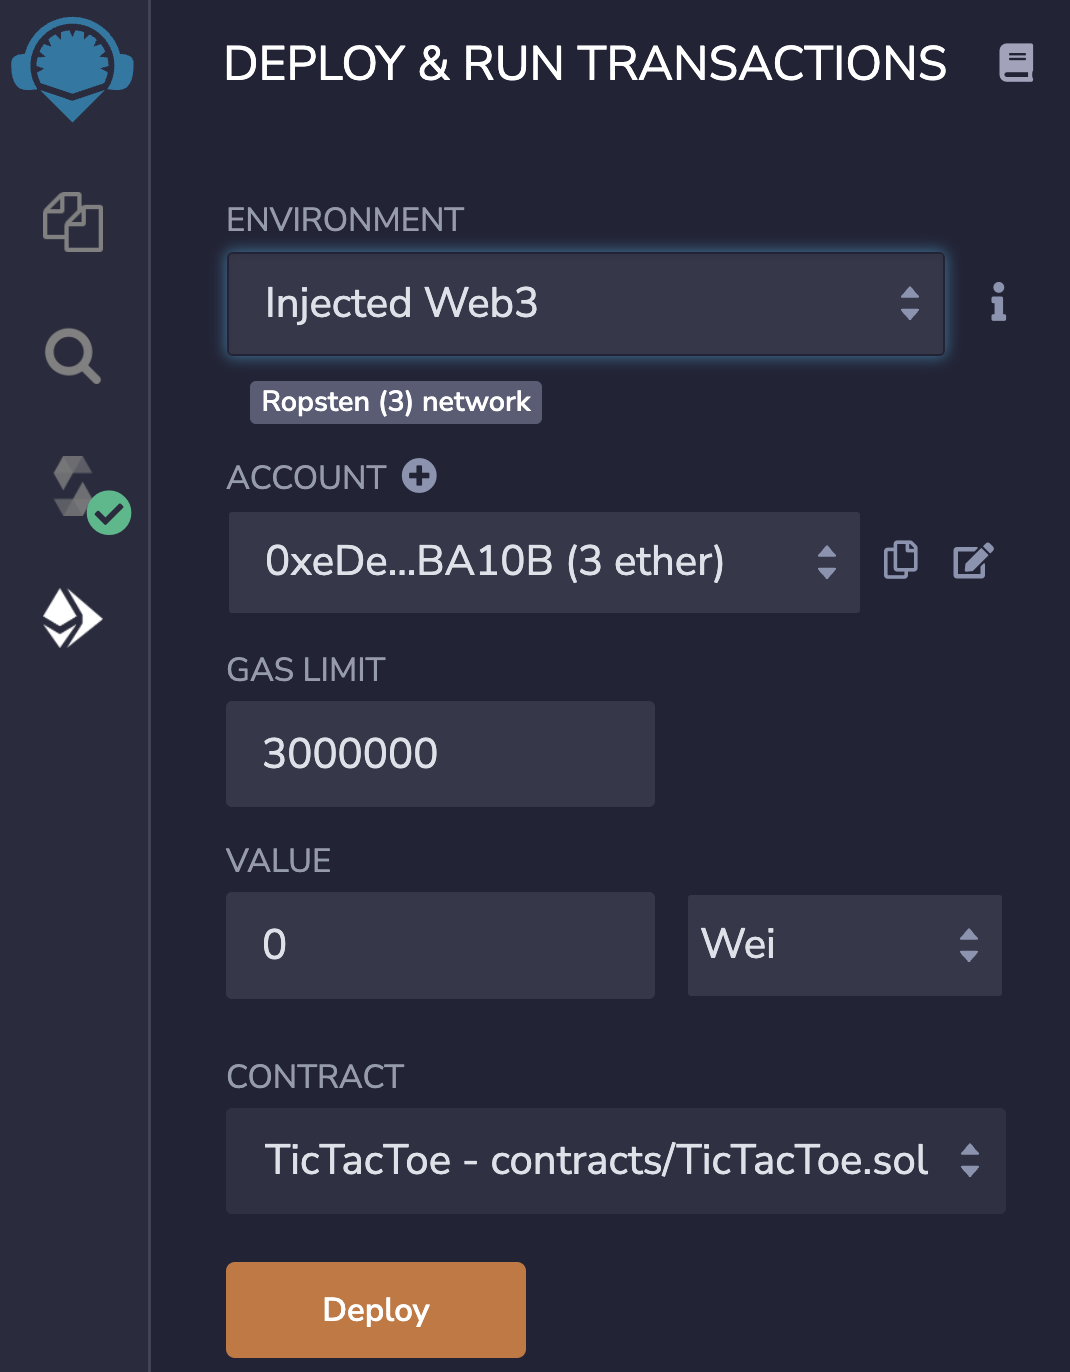 Deploying the contract to a testnet